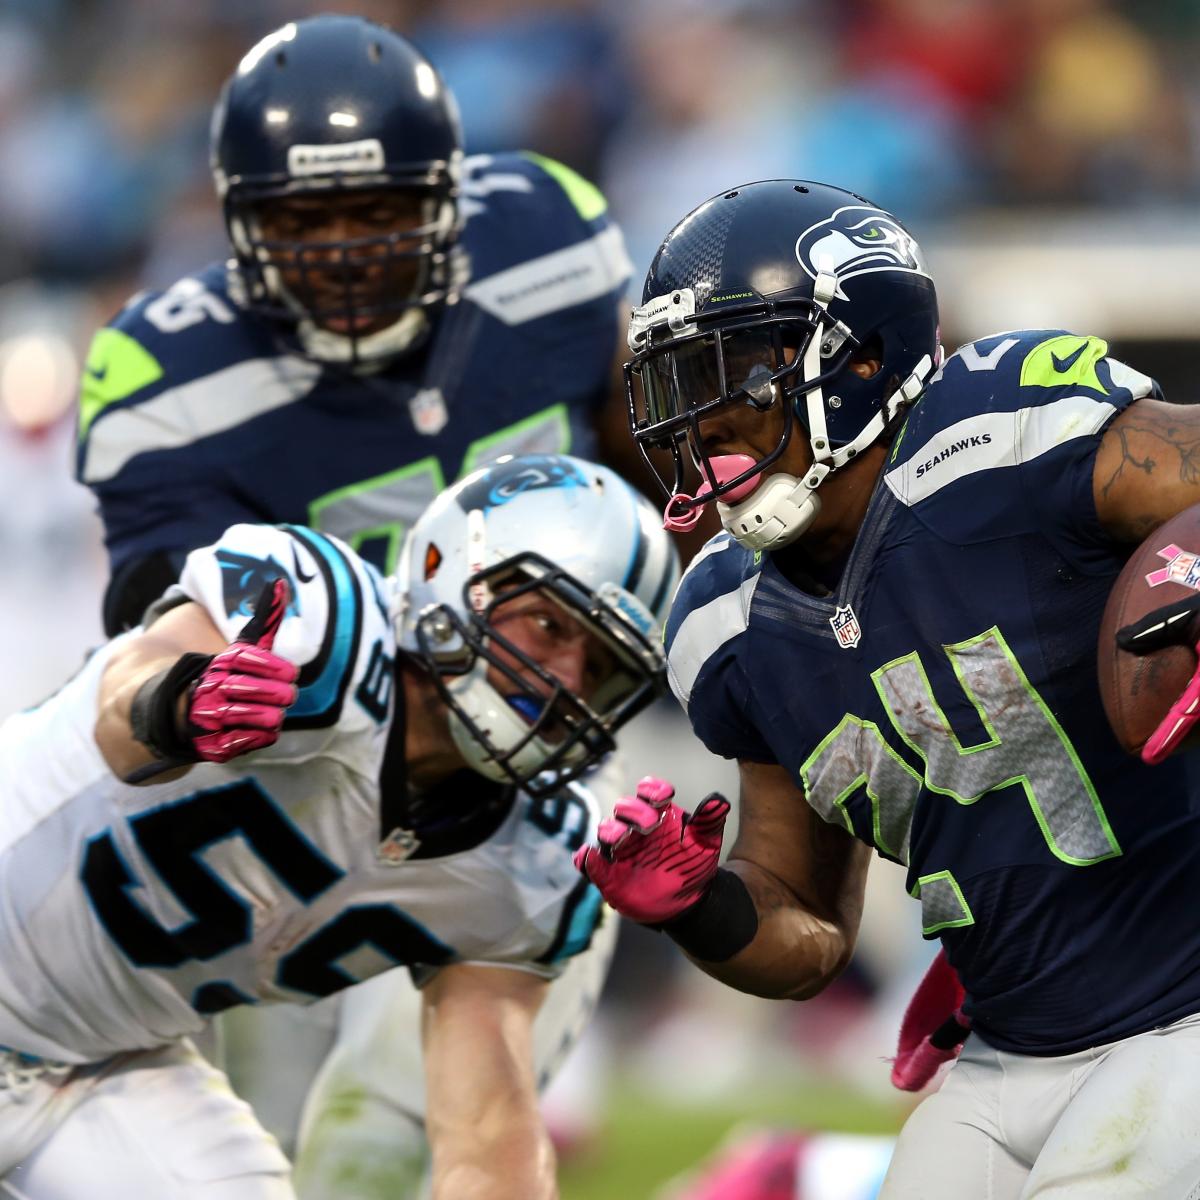 Seahawks vs. Panthers: Full Highlights and Recap | Bleacher Report